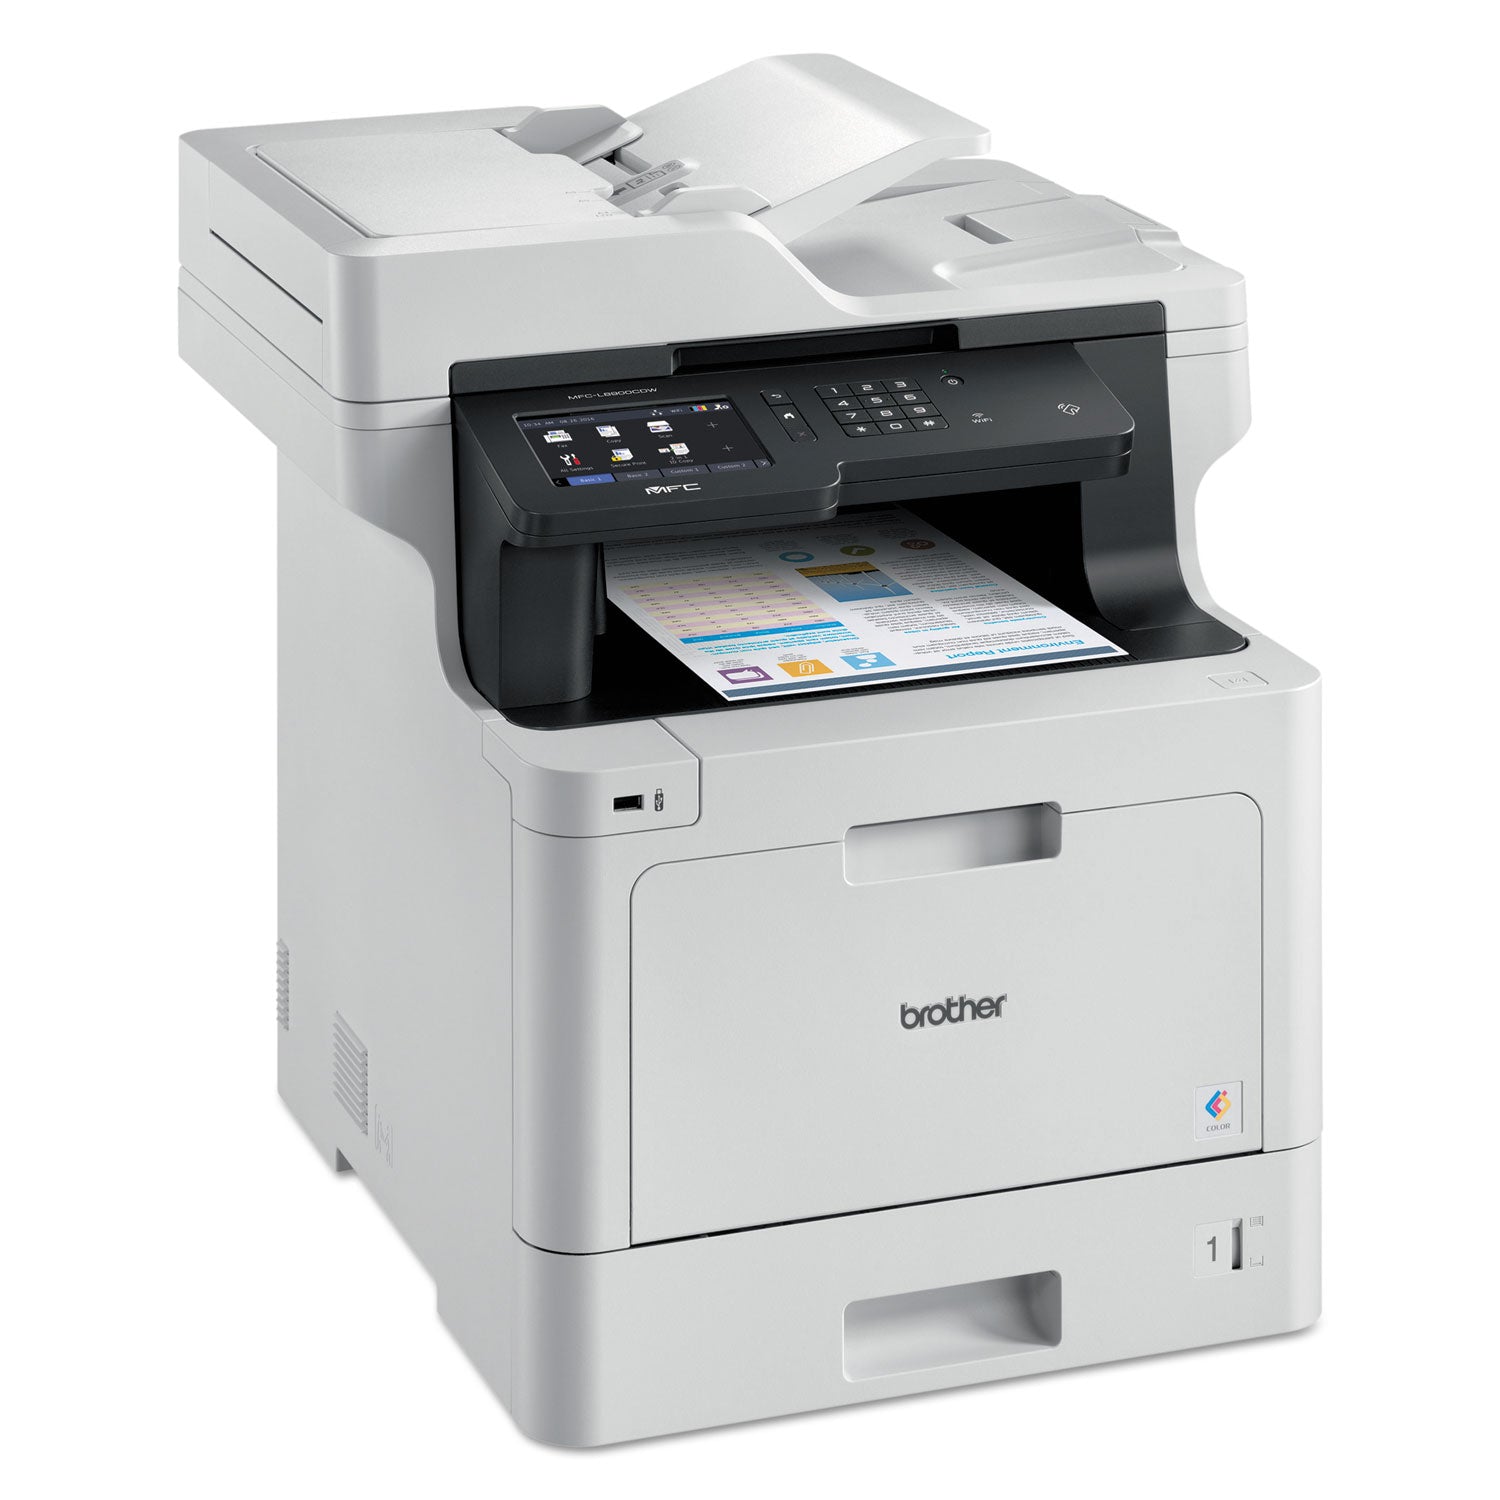 mfcl8900cdw-business-color-laser-all-in-one-printer-with-duplex-print-scan-copy-and-wireless-networking_brtmfcl8900cdw - 3